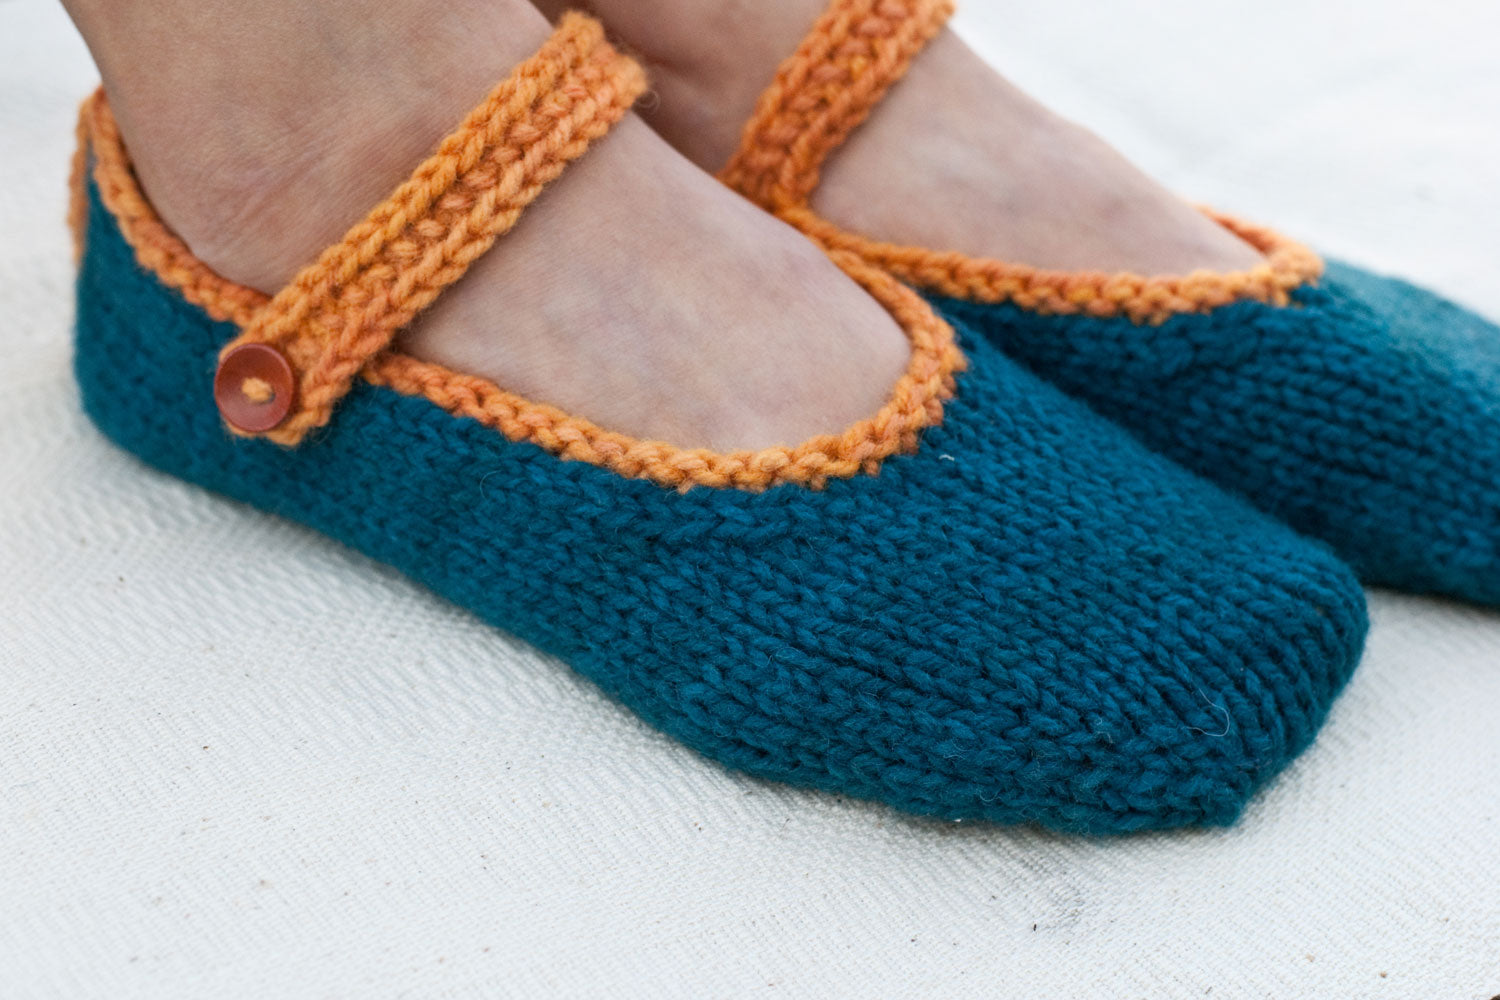 woman's feet wearing sporty hand-knit slippers in dark teal with an orange strap and button